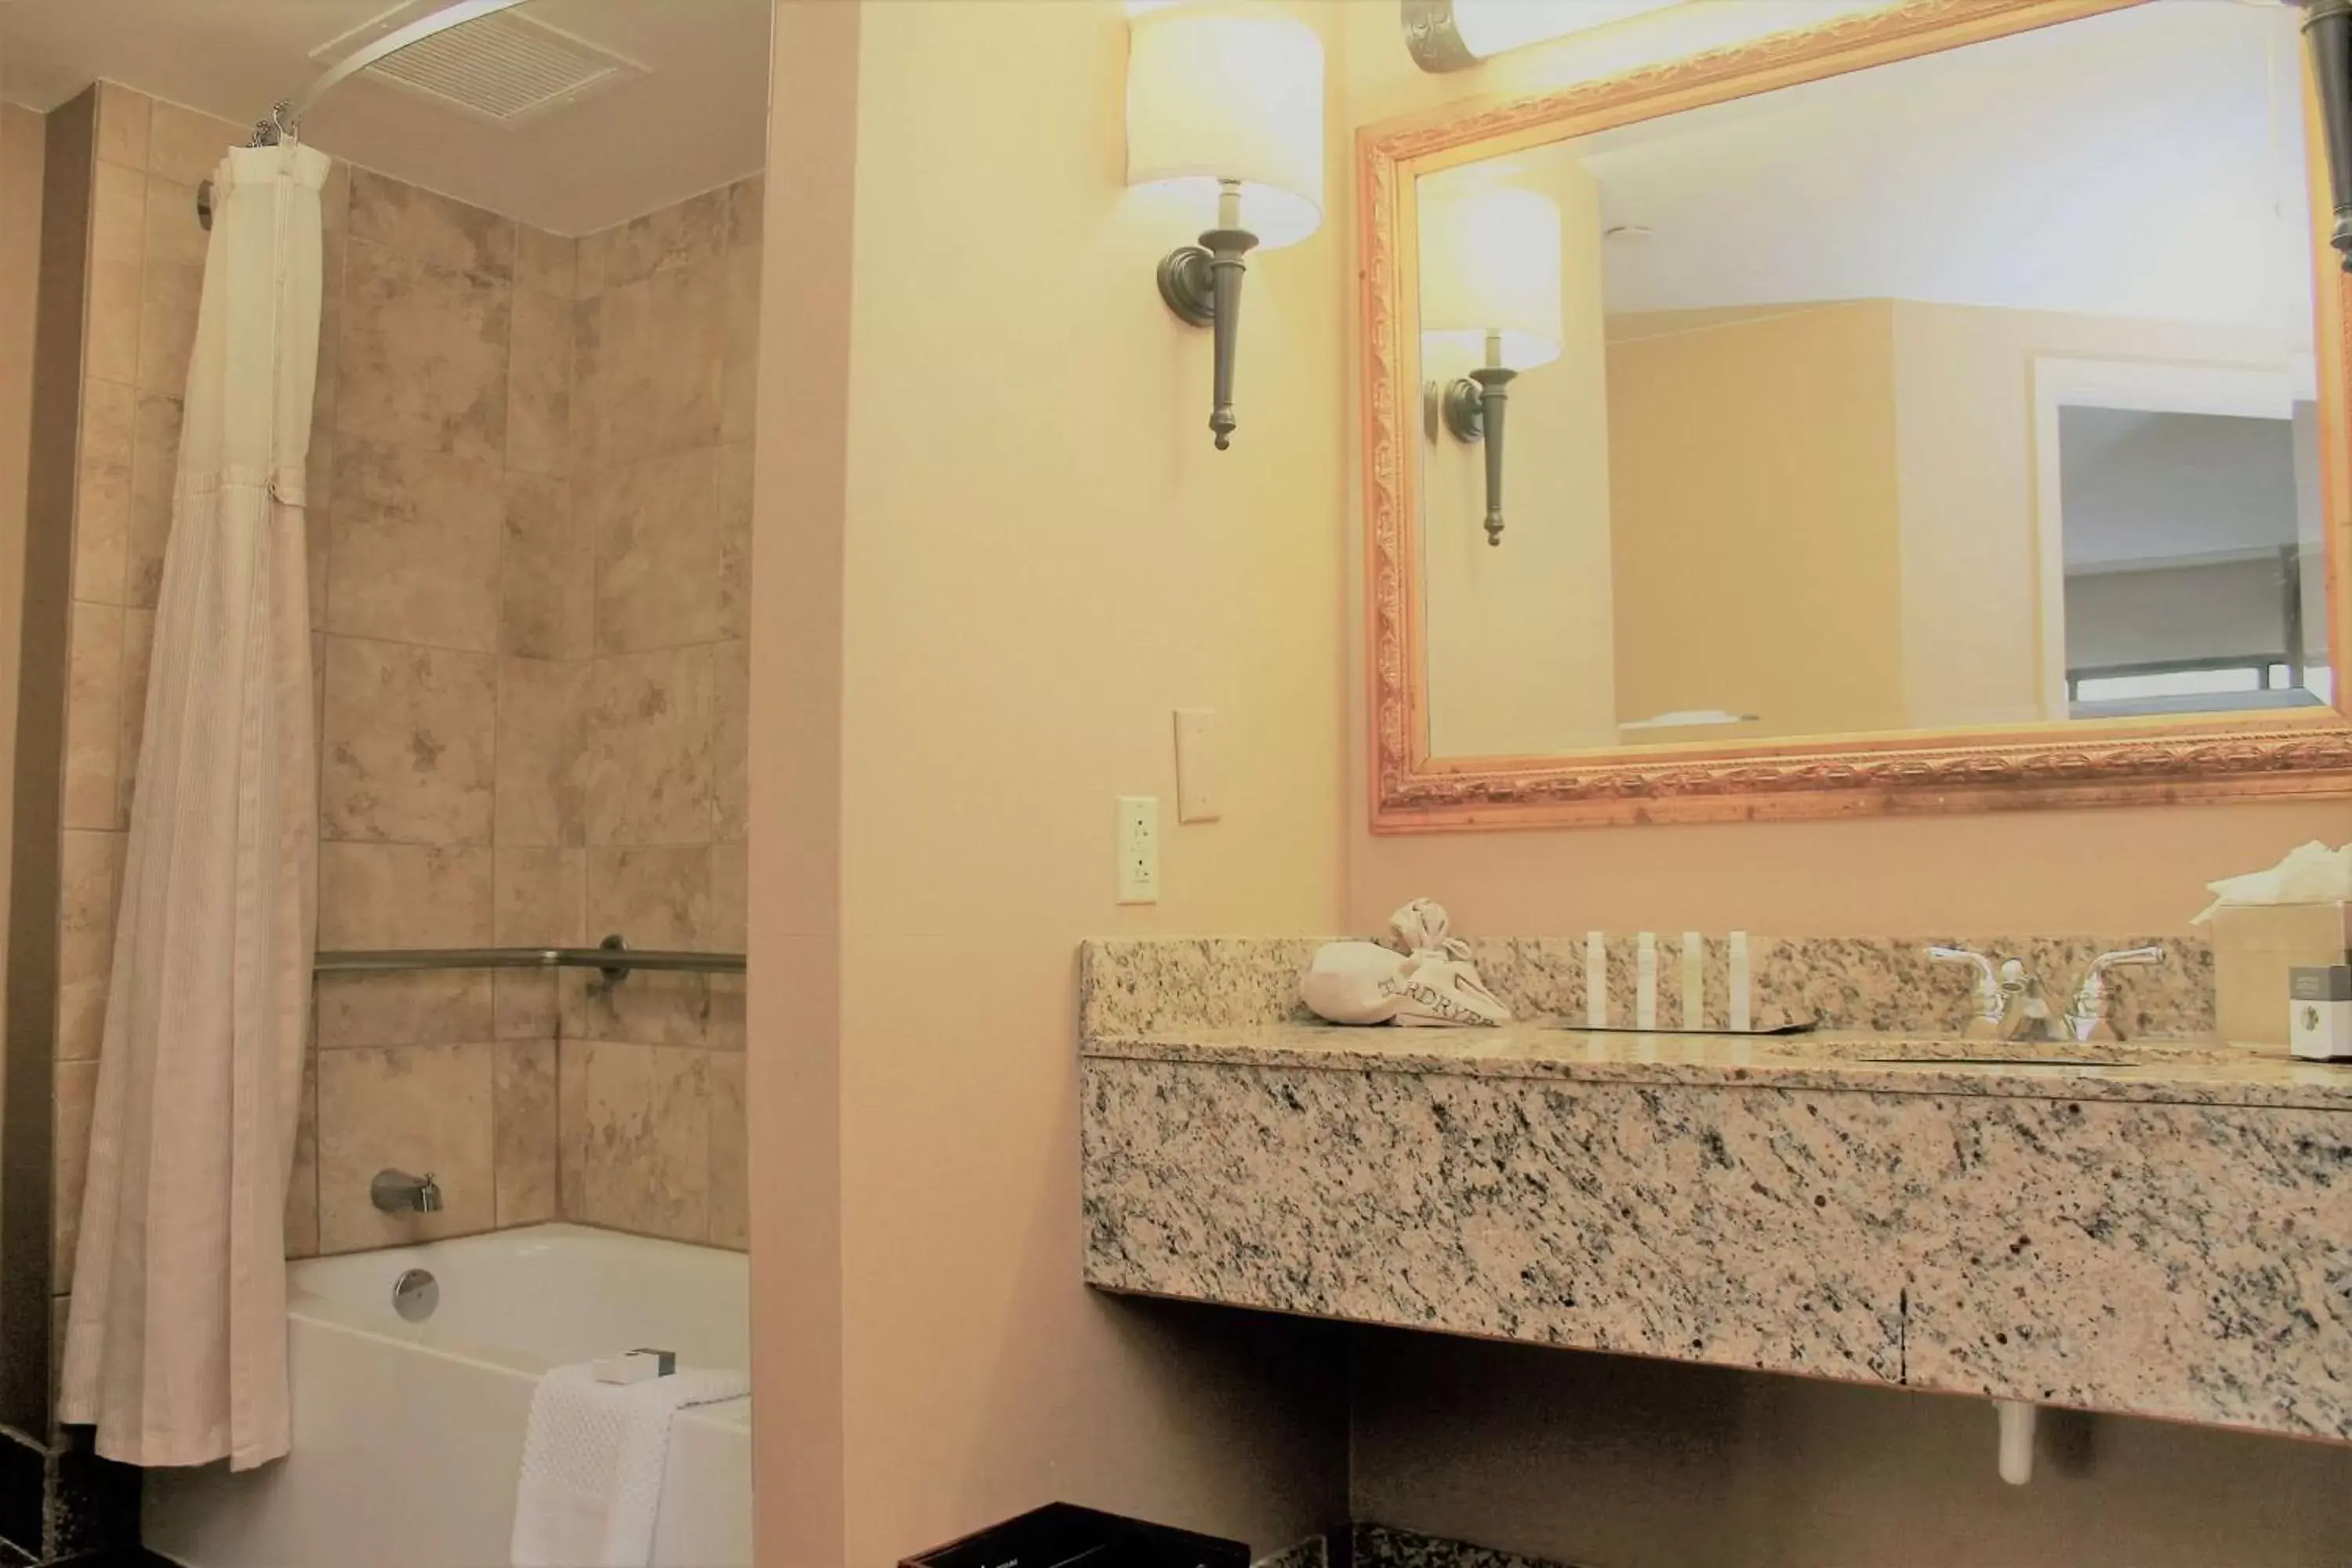 Bathroom in DoubleTree Suites by Hilton Dayton/Miamisburg